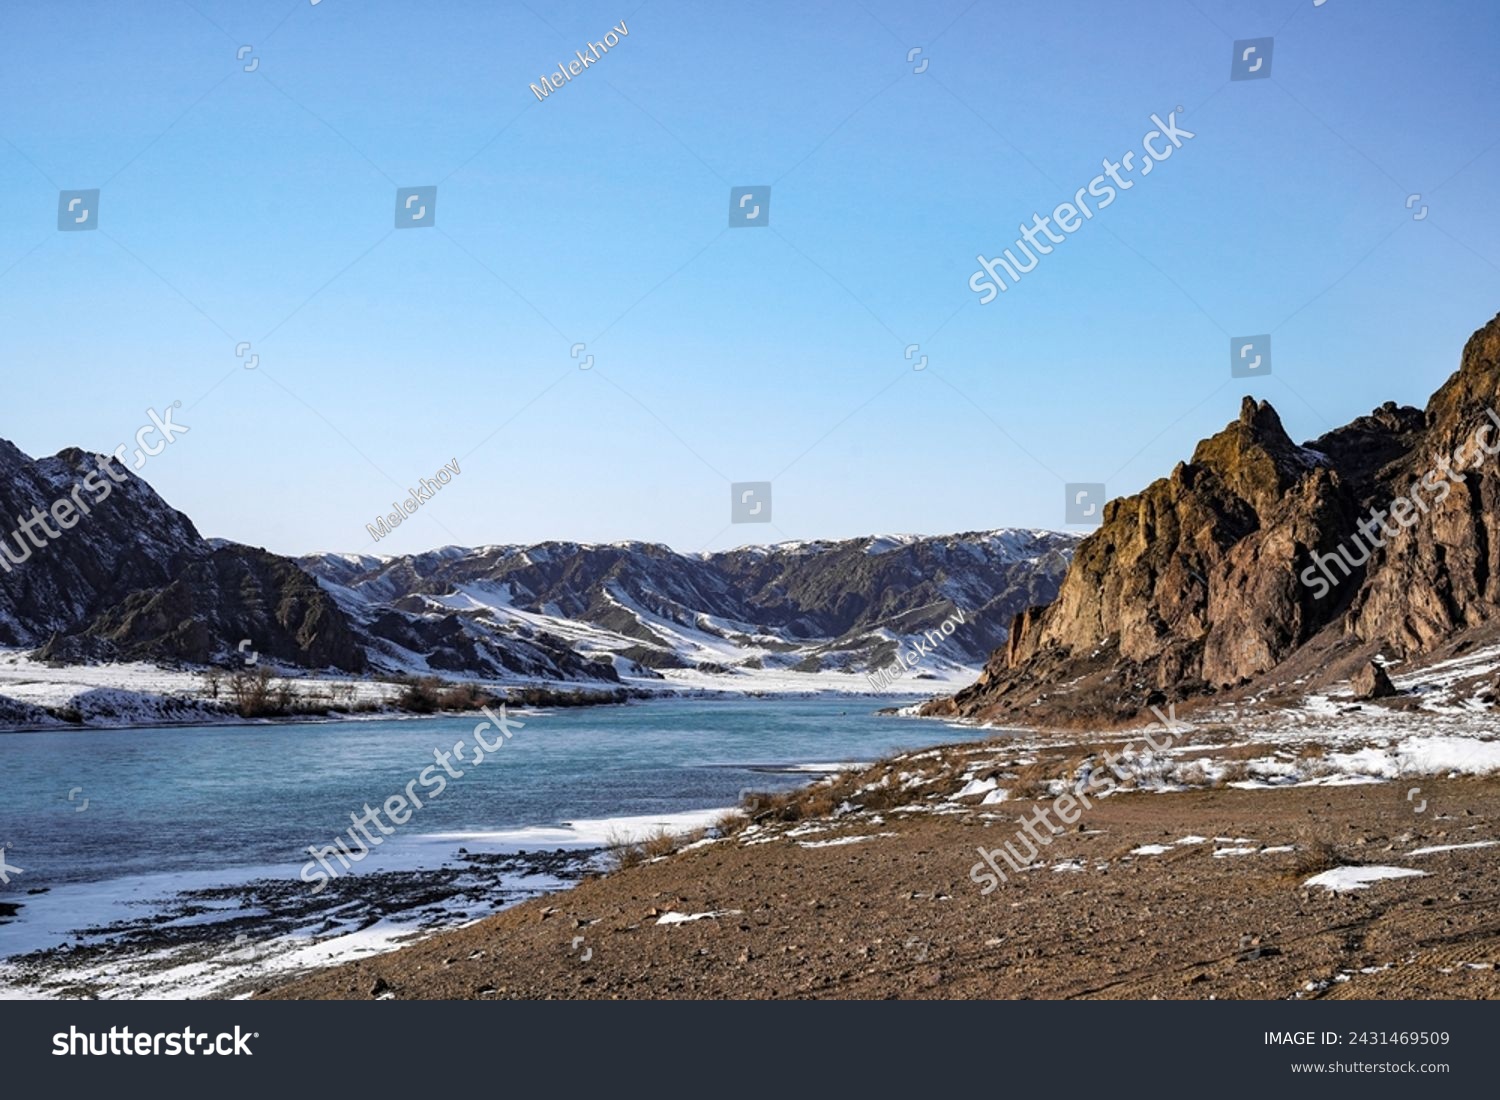 
The river froze, forming an icy panel that stretches between the rocks, like a silver bridge connecting the inaccessible cliffs on both sides. #2431469509